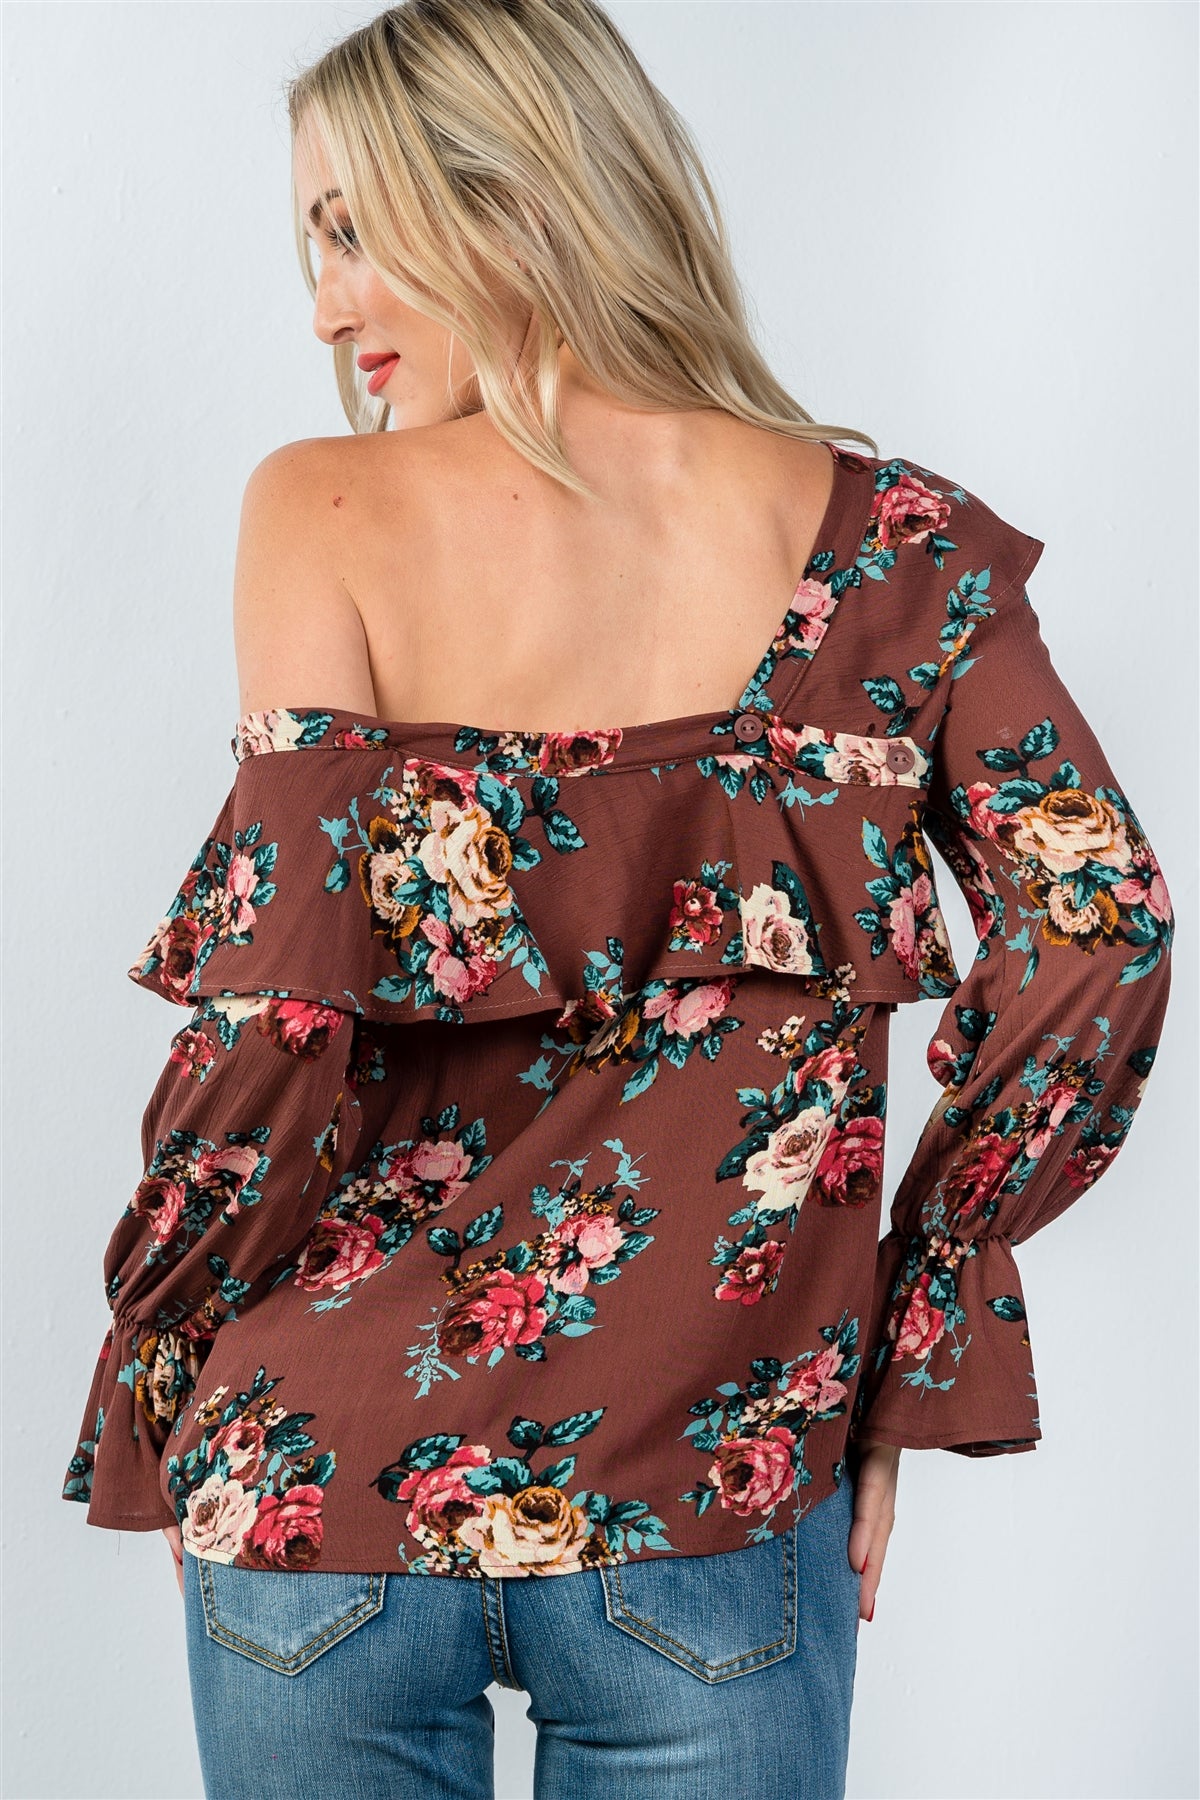 Ladies fashion mocha and floral print one shoulder ruffle blouse